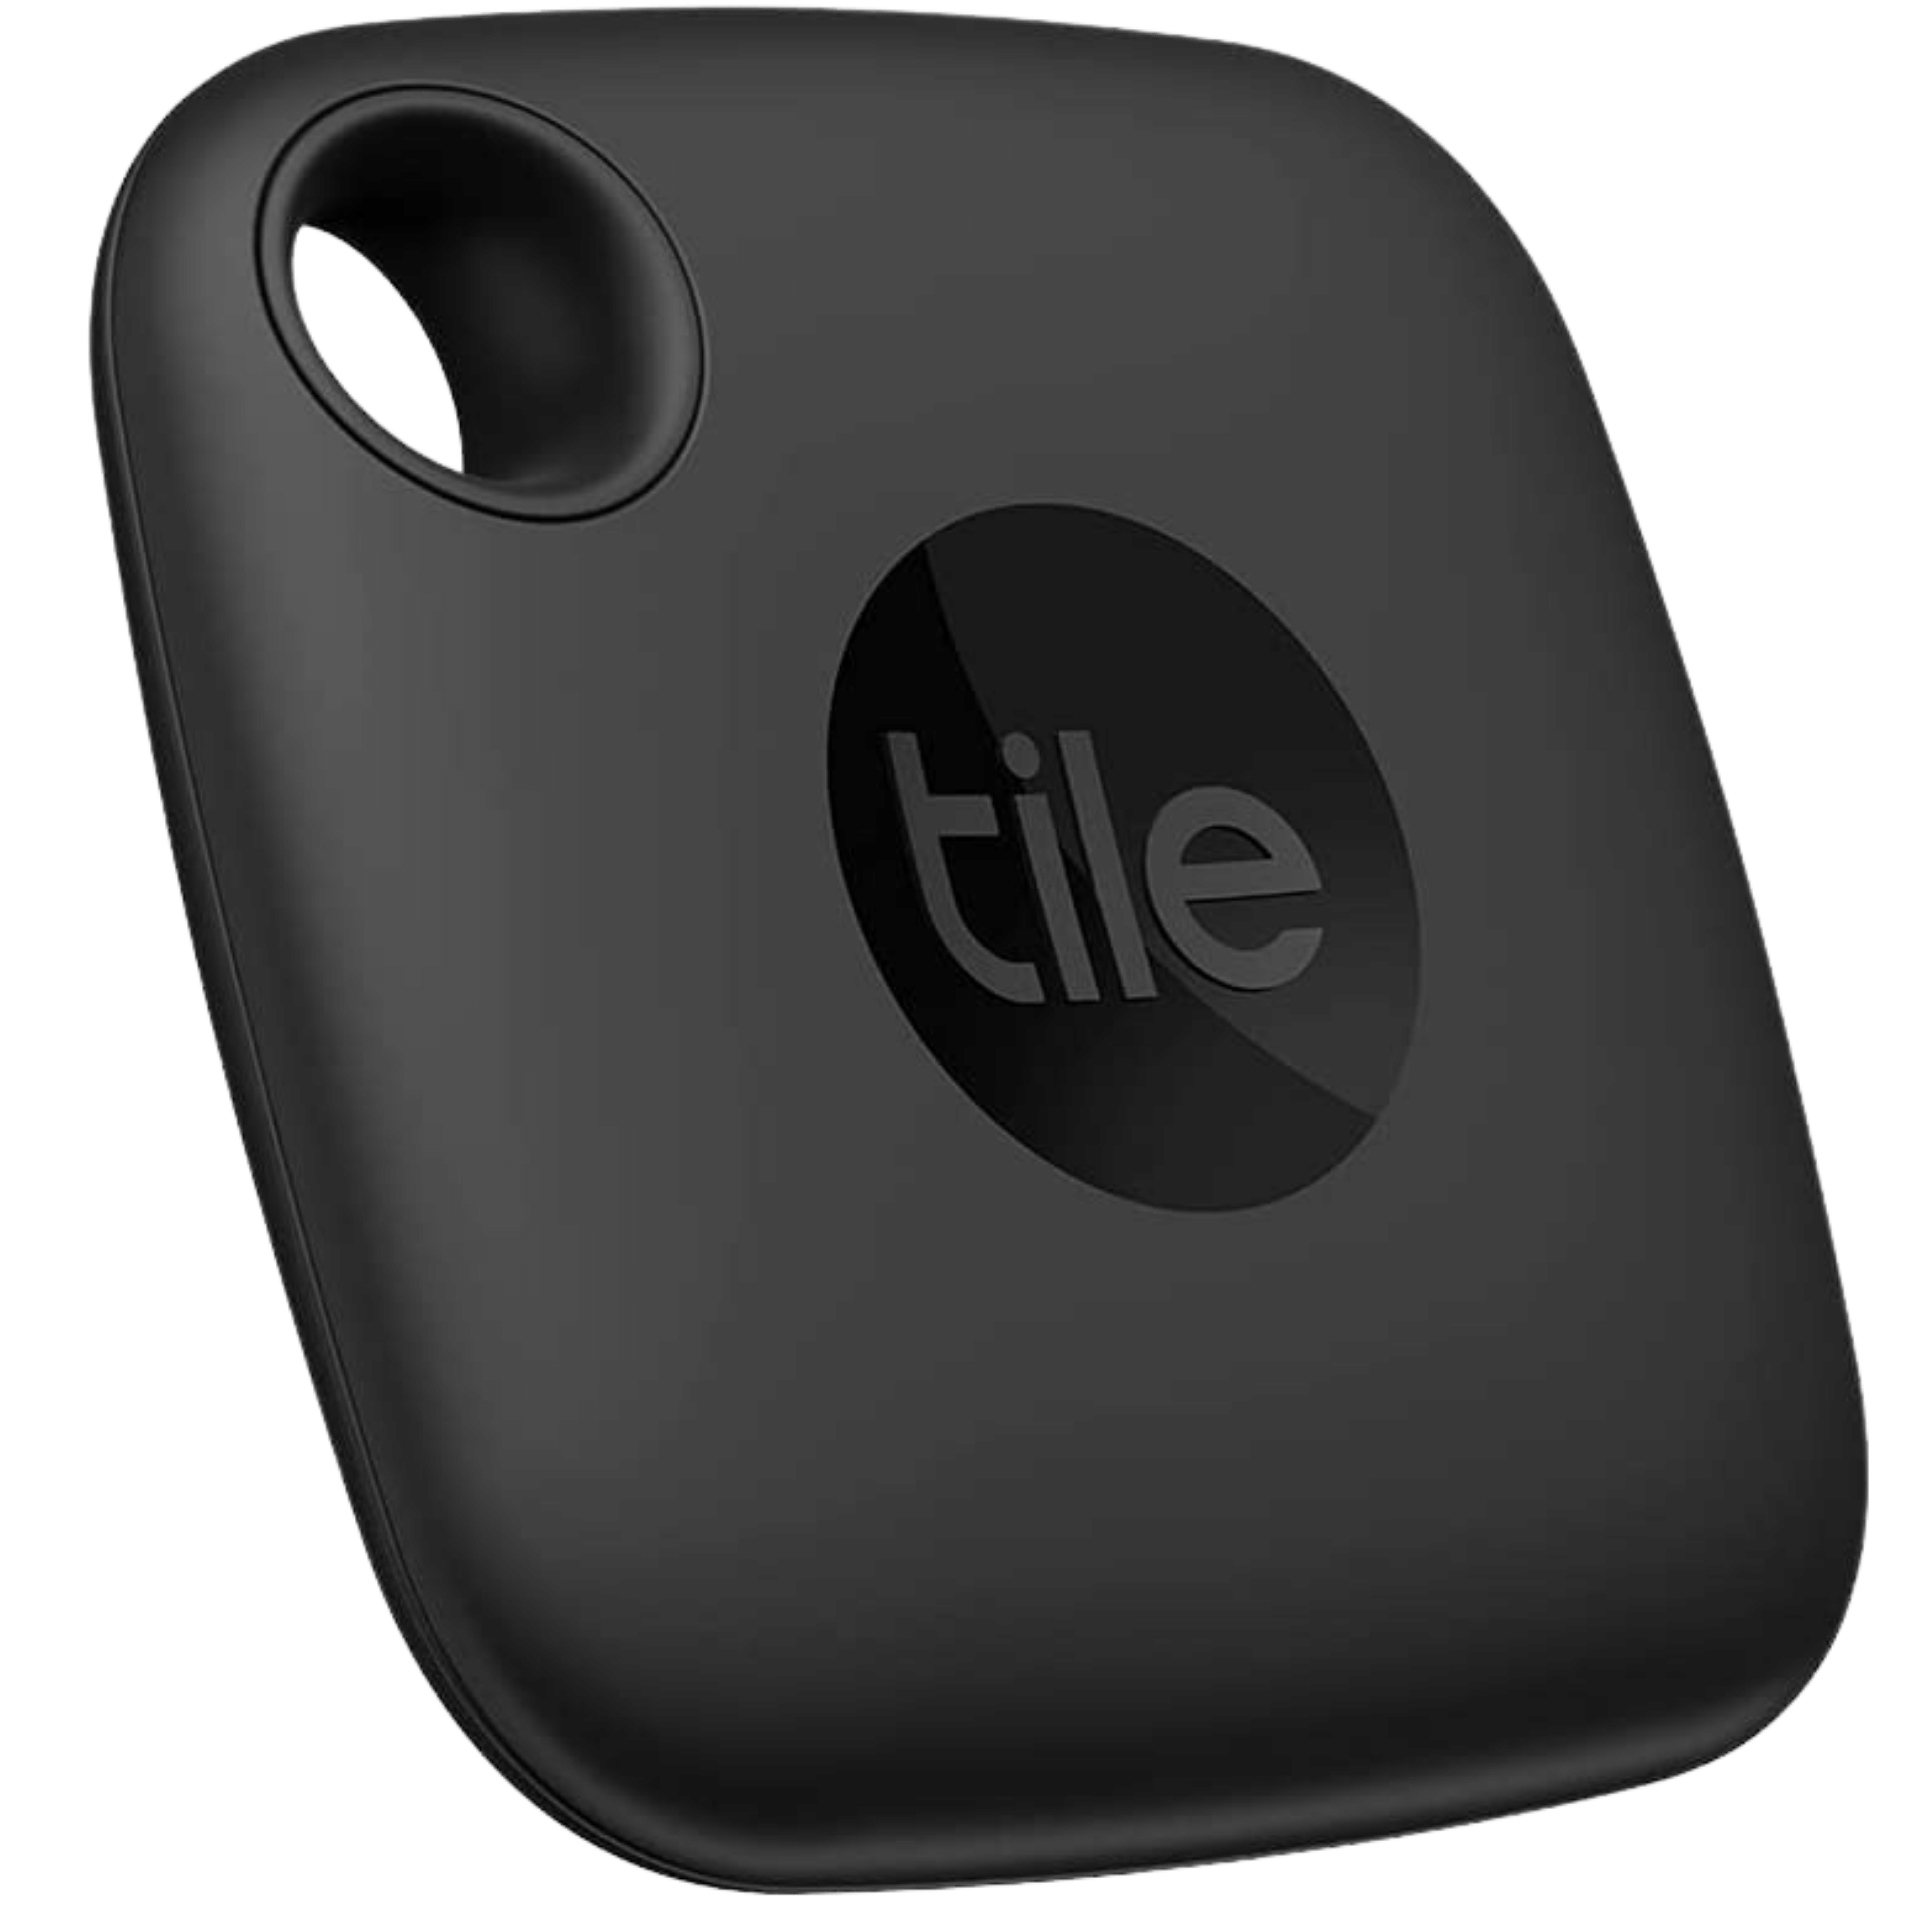 Product Image of Tile Mate 2022